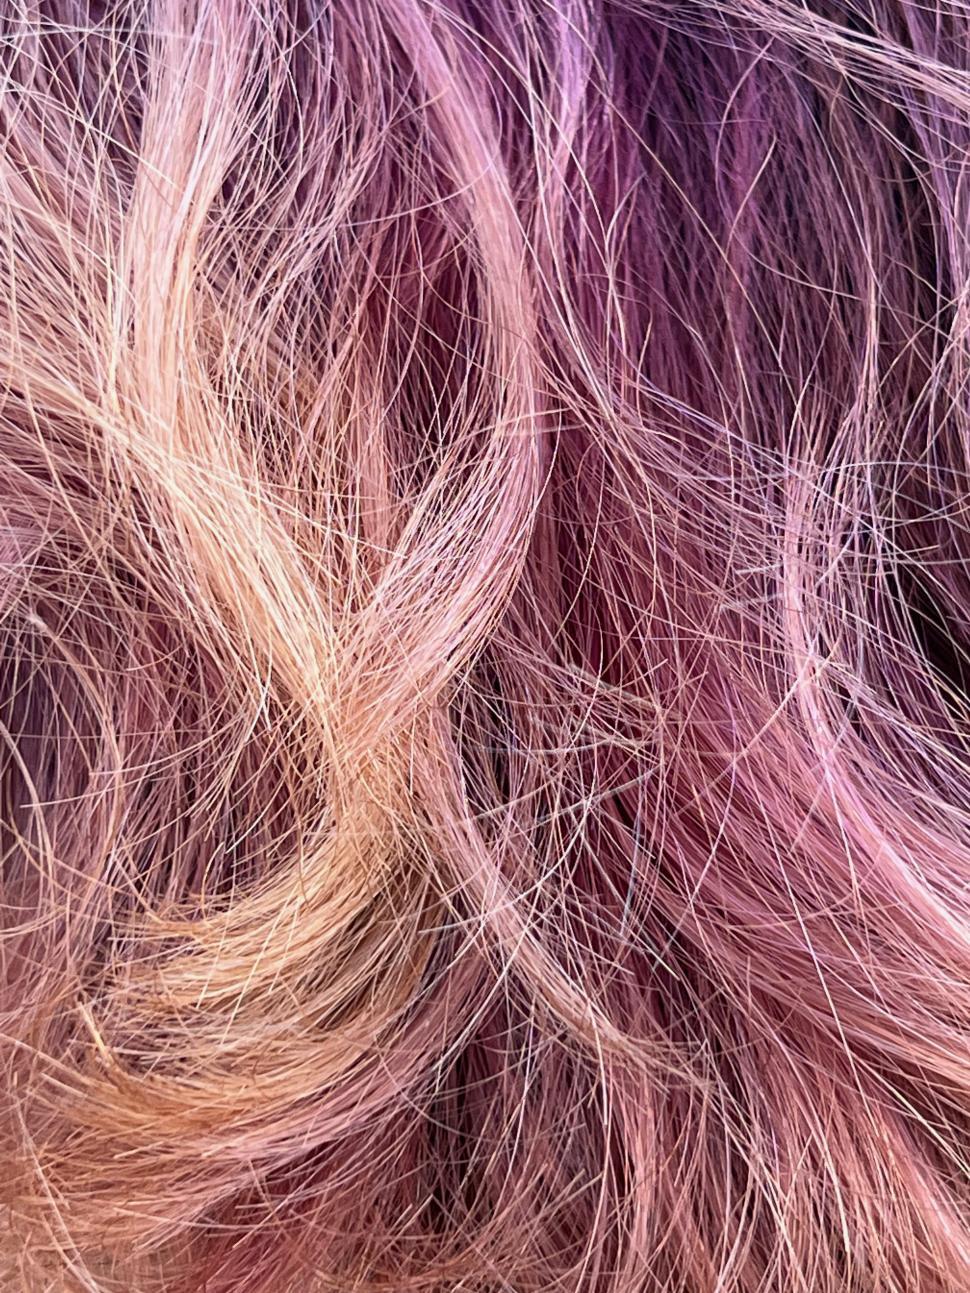 Free Image of Close-up of multi-colored hair strands 